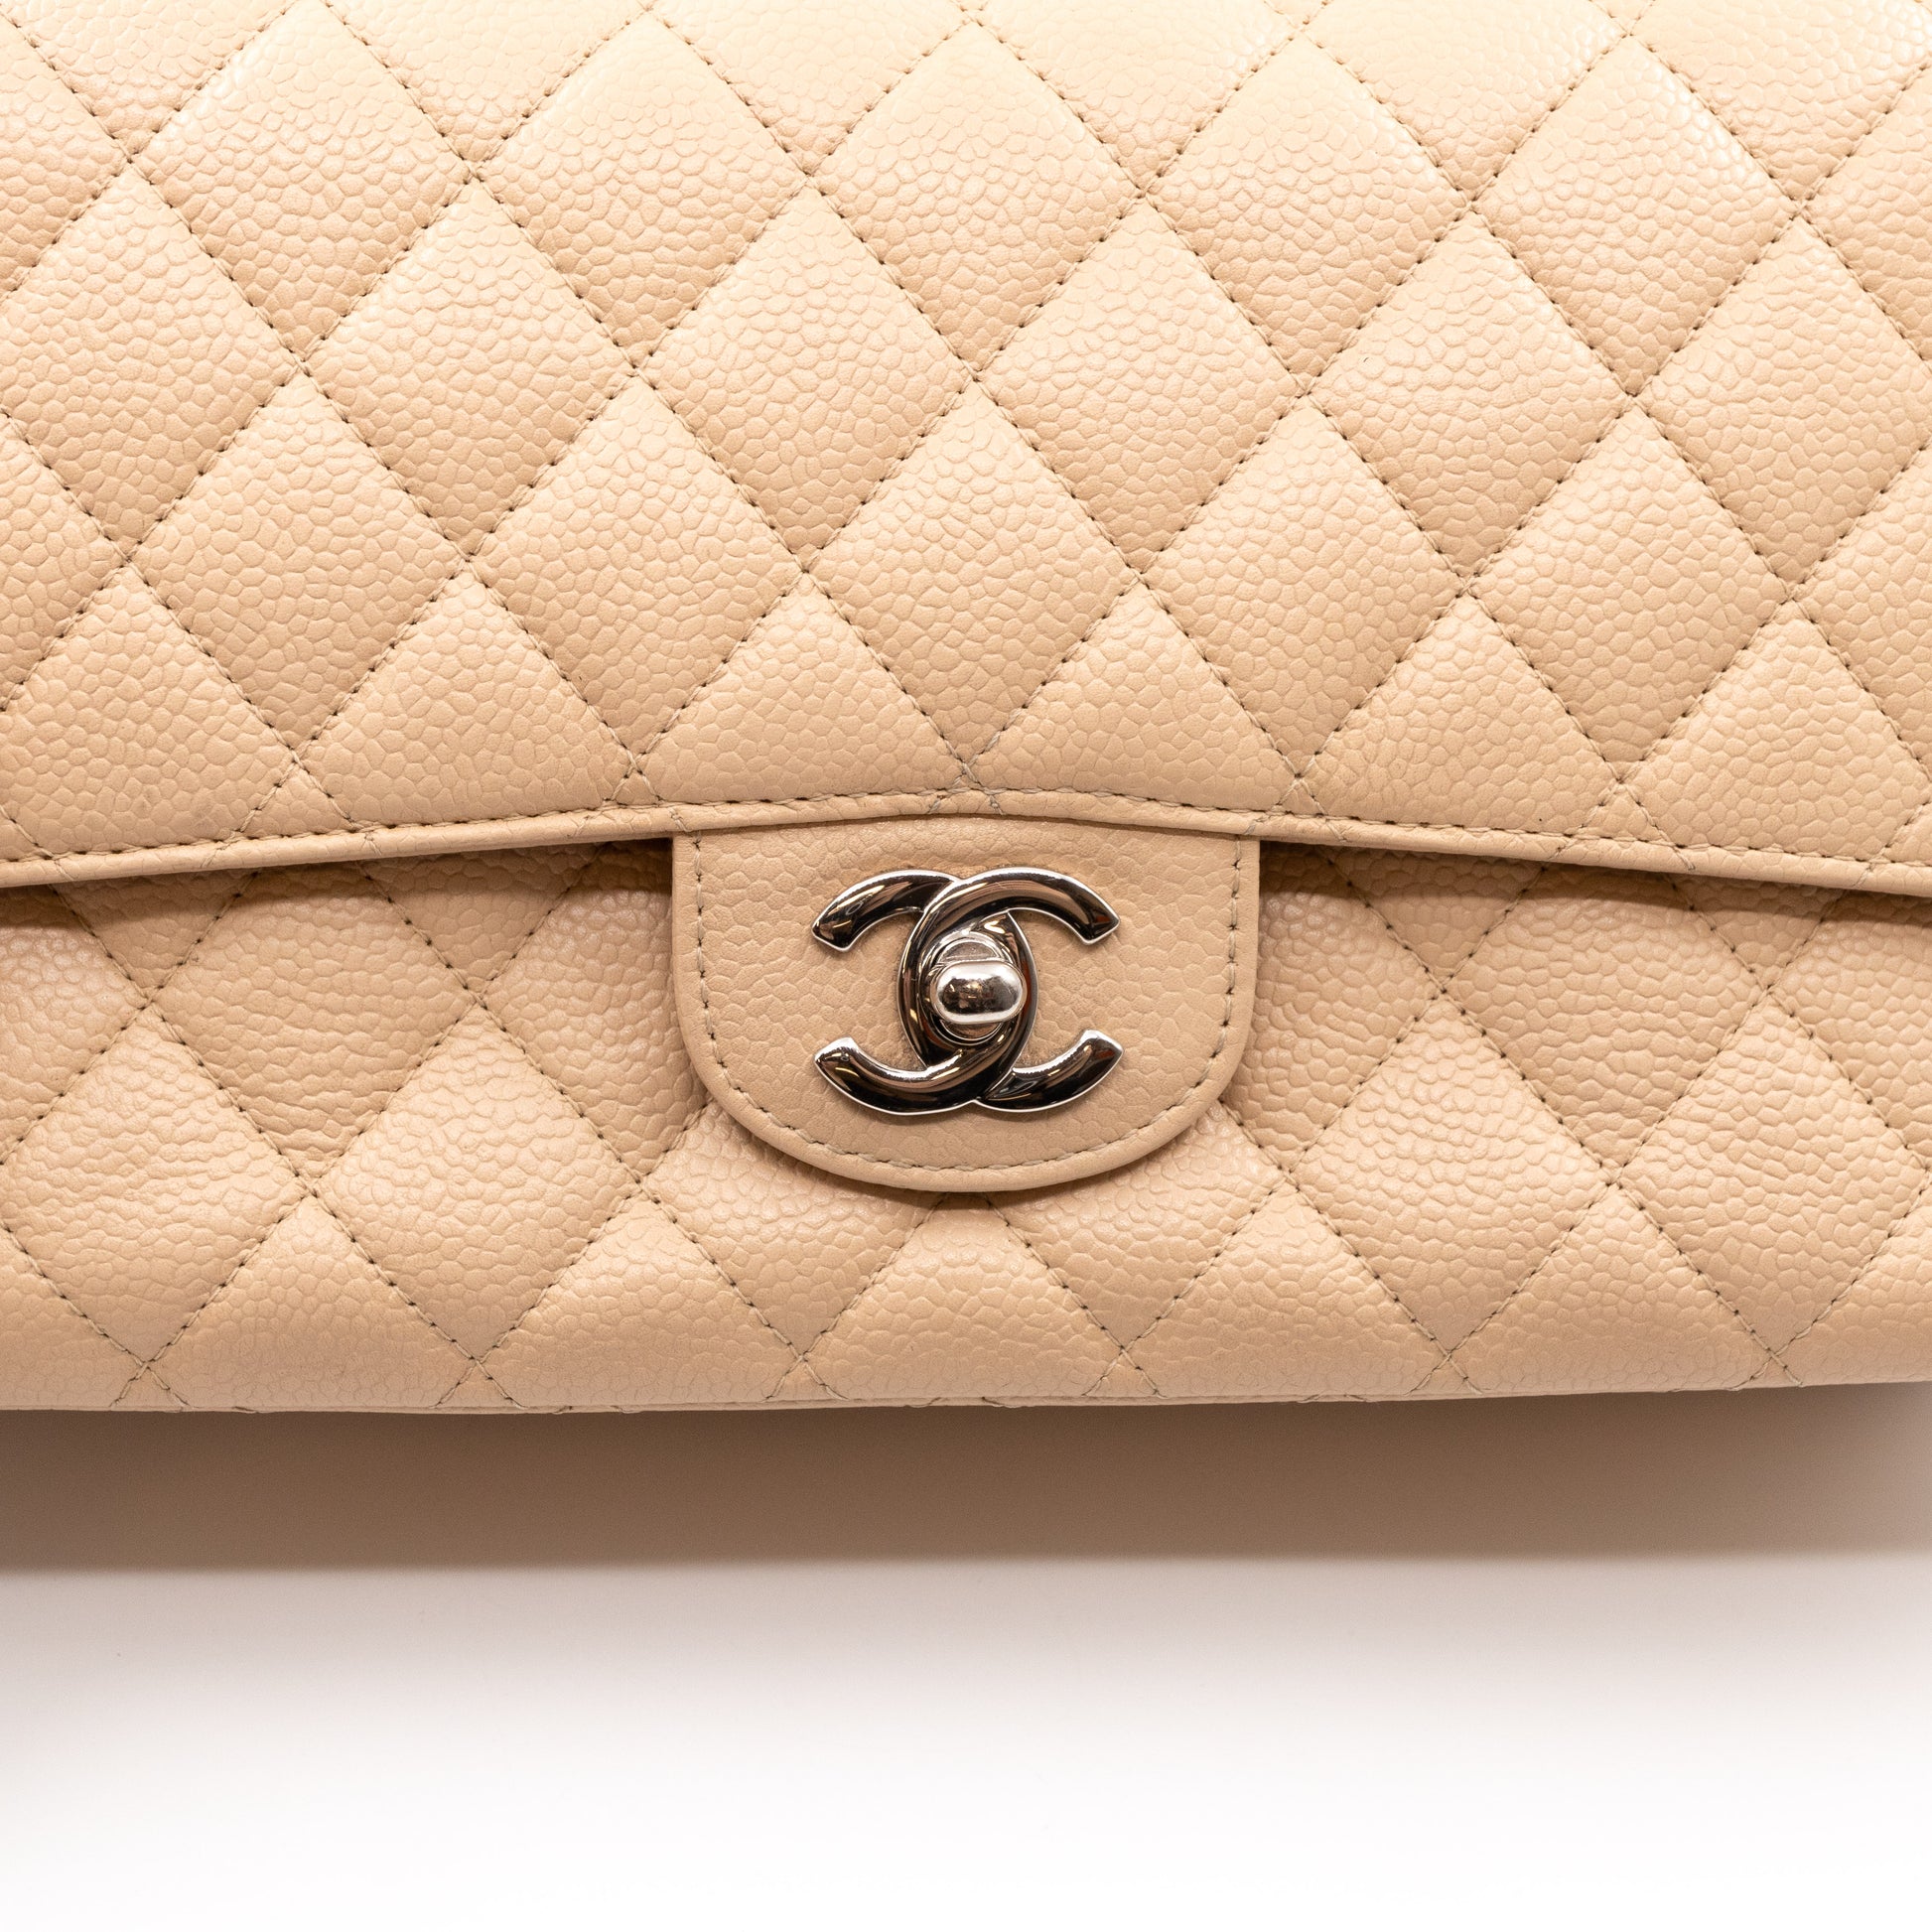 Chanel – Chanel Classic Double Flap Bag Medium Beige Caviarskin Silver HW –  Queen Station